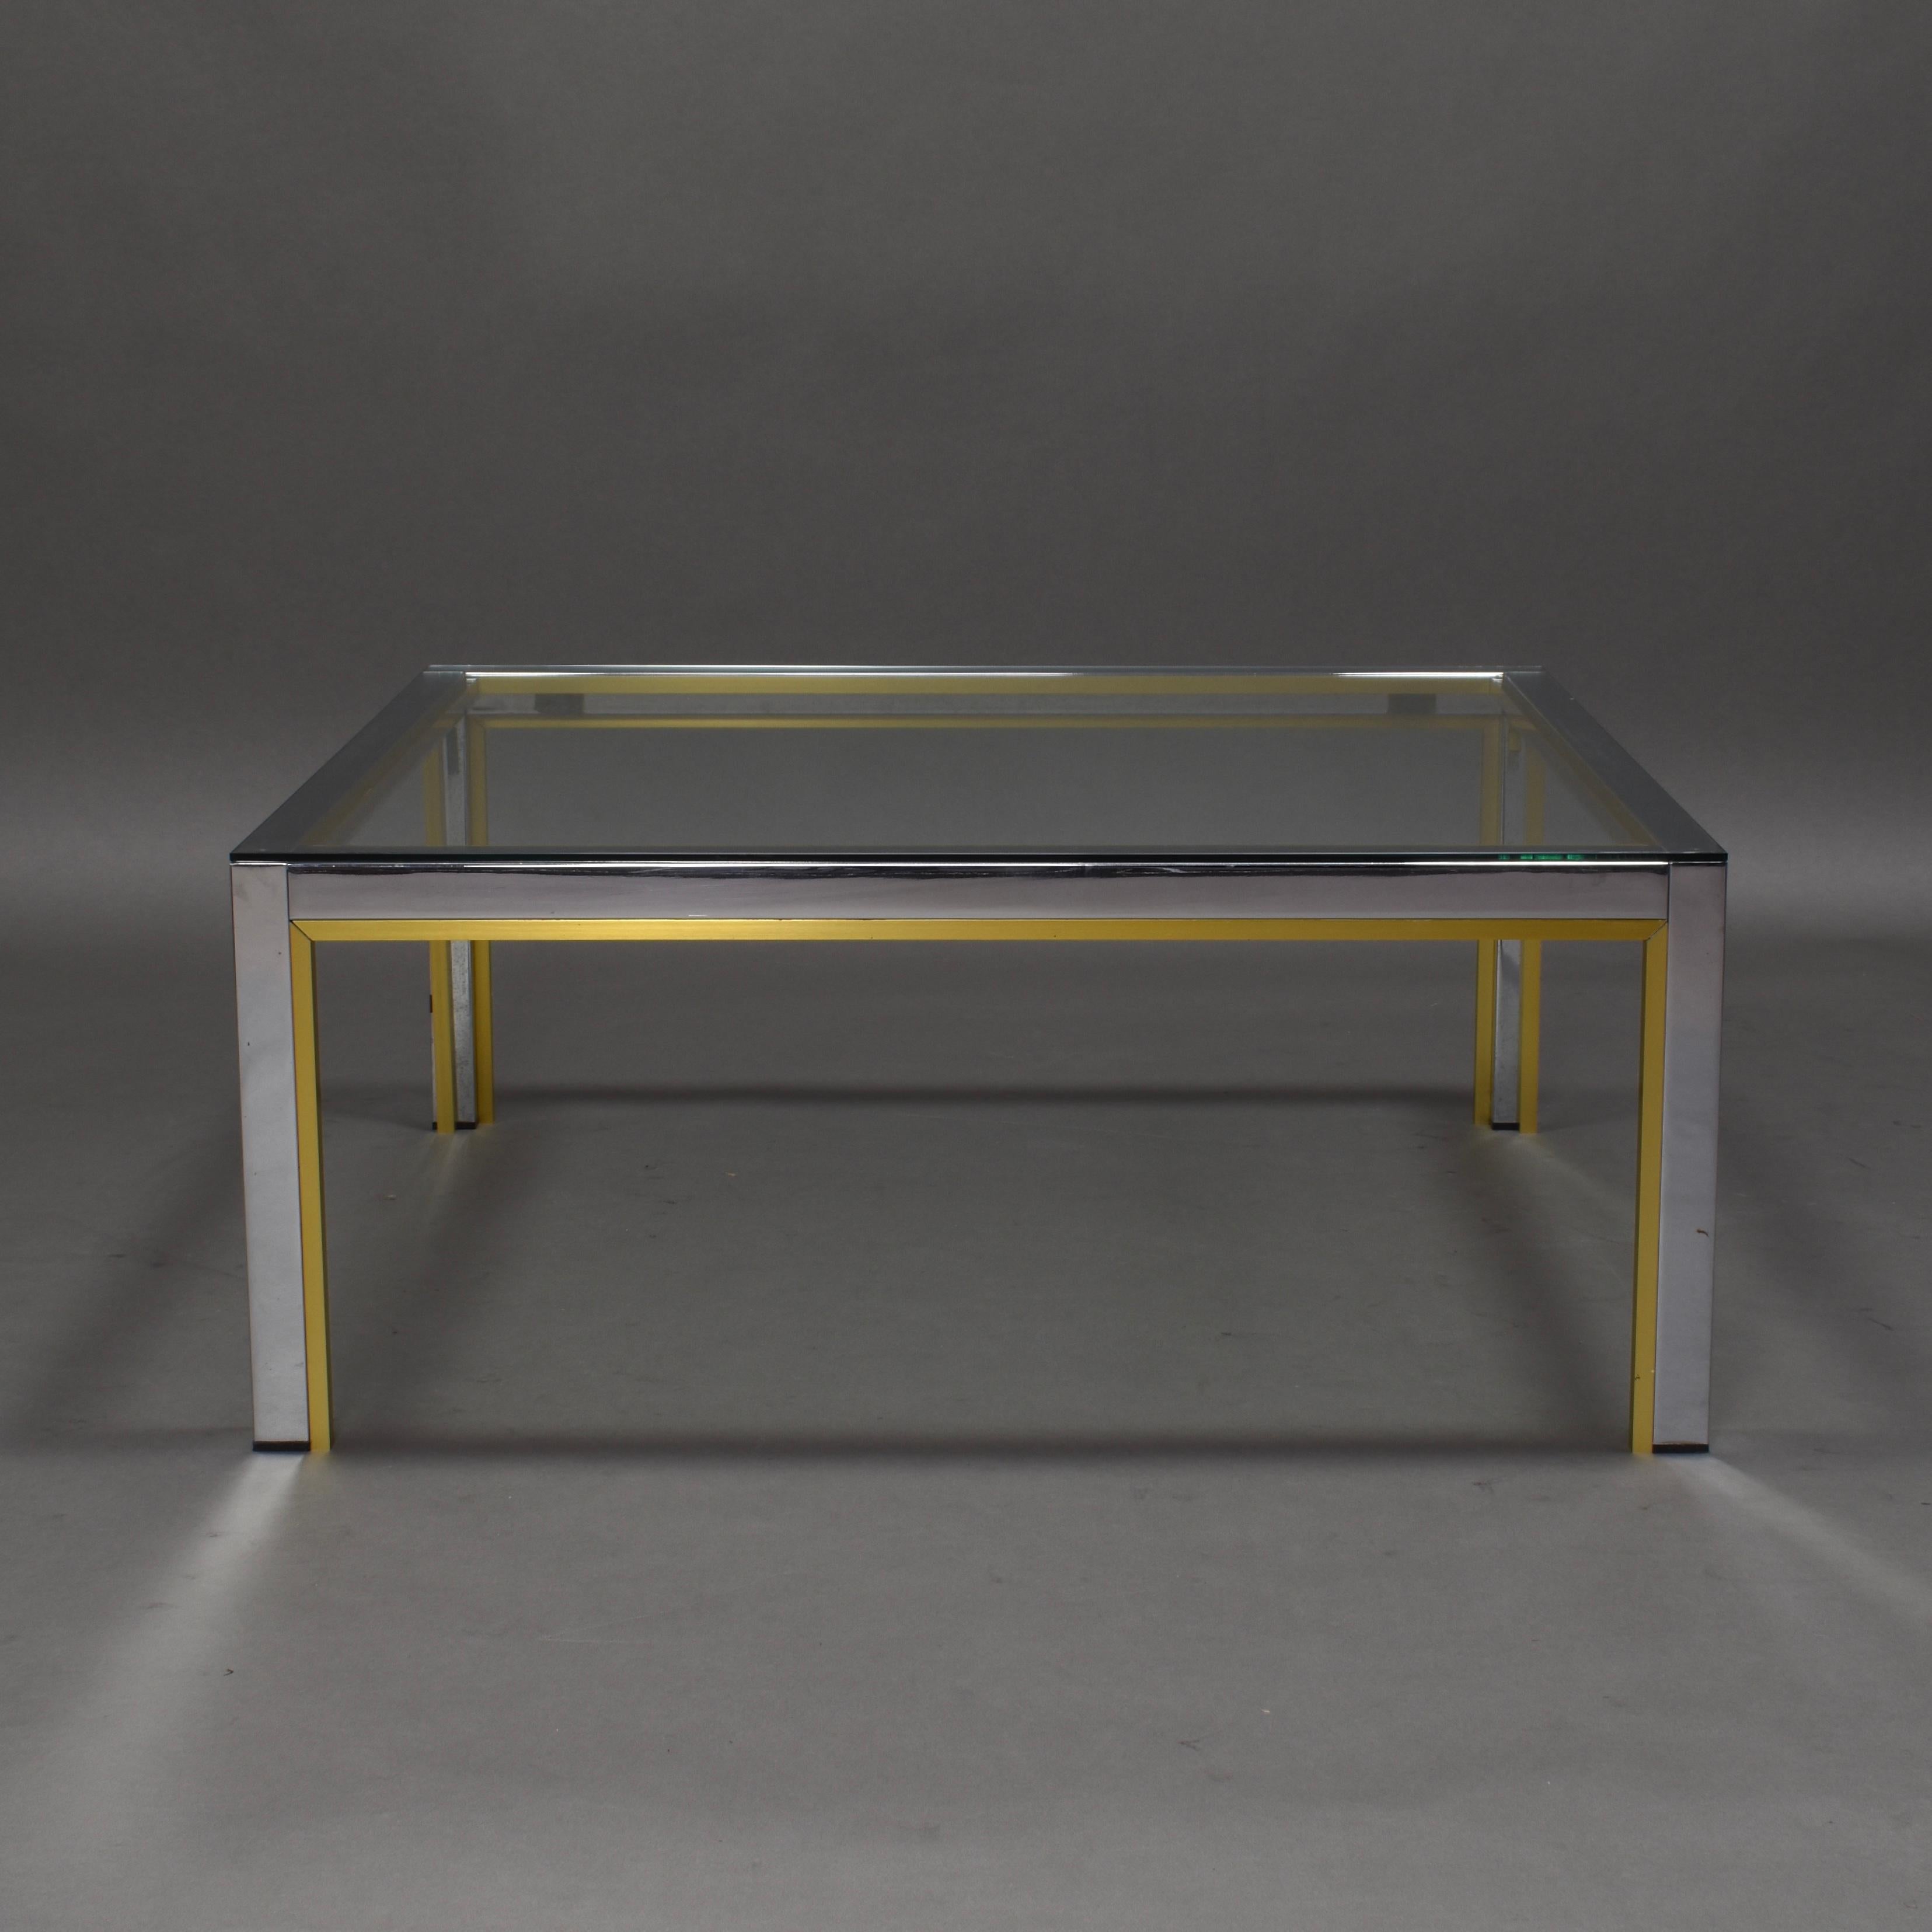 Nice square coffee table by the Italian manufacturer Romeo Rega.
The table is made of chrome and gold colored aluminum with a clear glass top.
It still remains in very good condition with some normal signs of age and use.